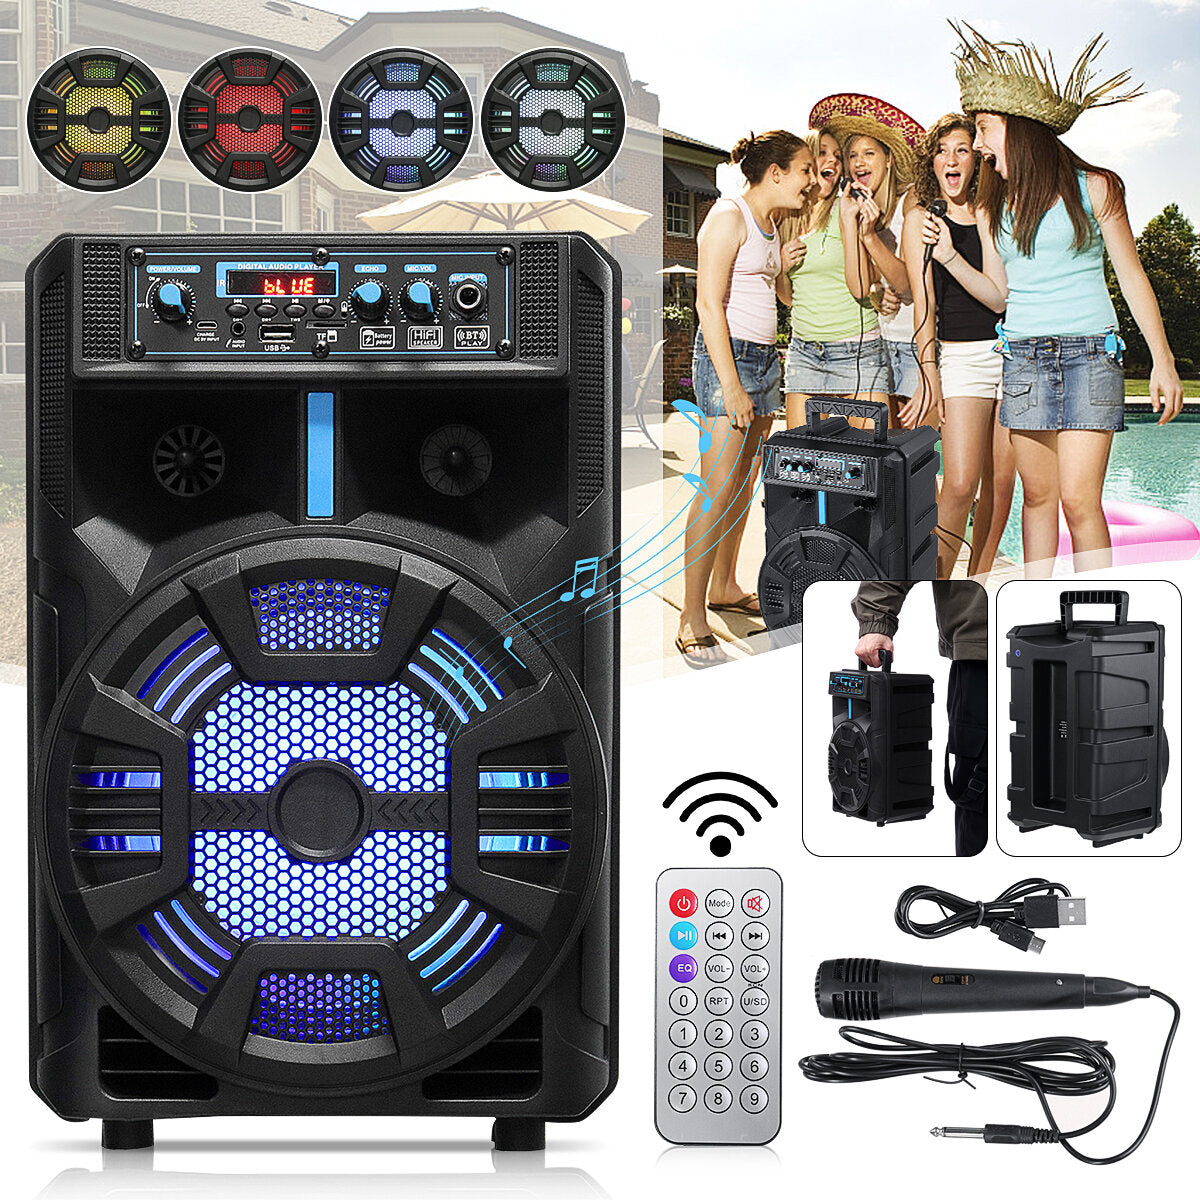 Portable FM bluetooth Wireless Speaker Subwoofer Heavy Bass Sound System with Remote for Party